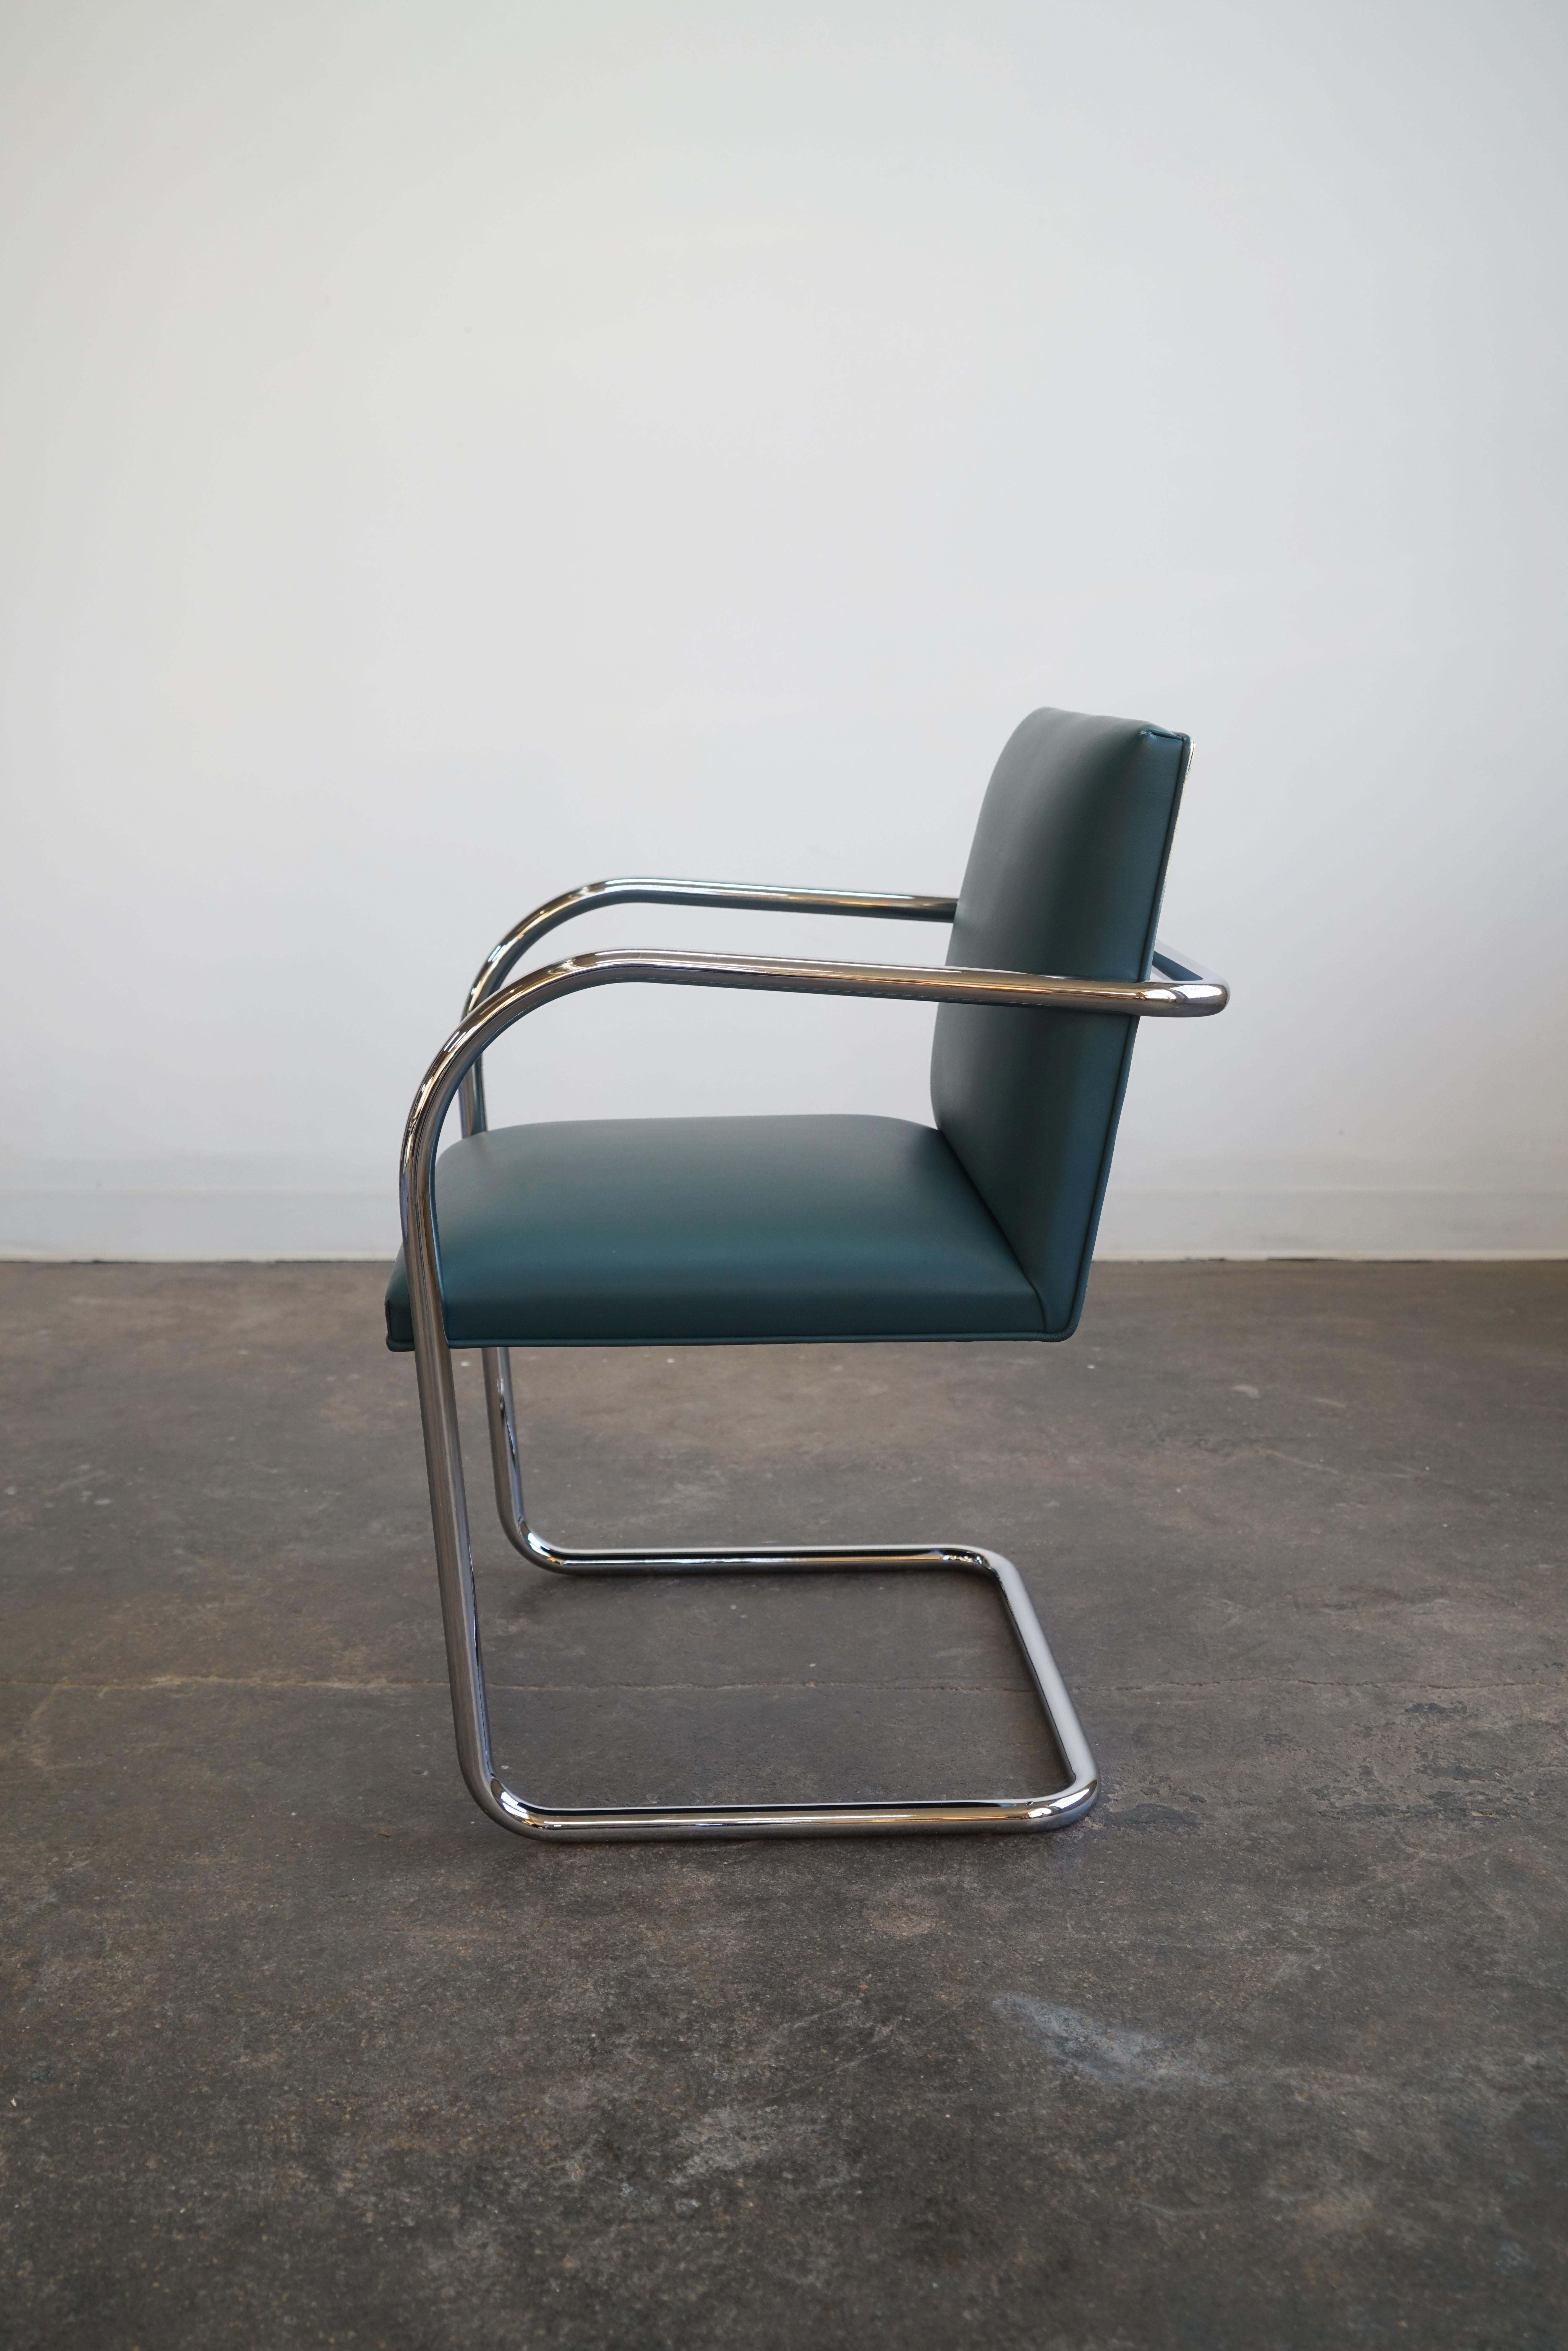 Four Mies van der Rohe Knoll BRNO tubular armchairs in teal leather In Good Condition For Sale In Chicago, IL